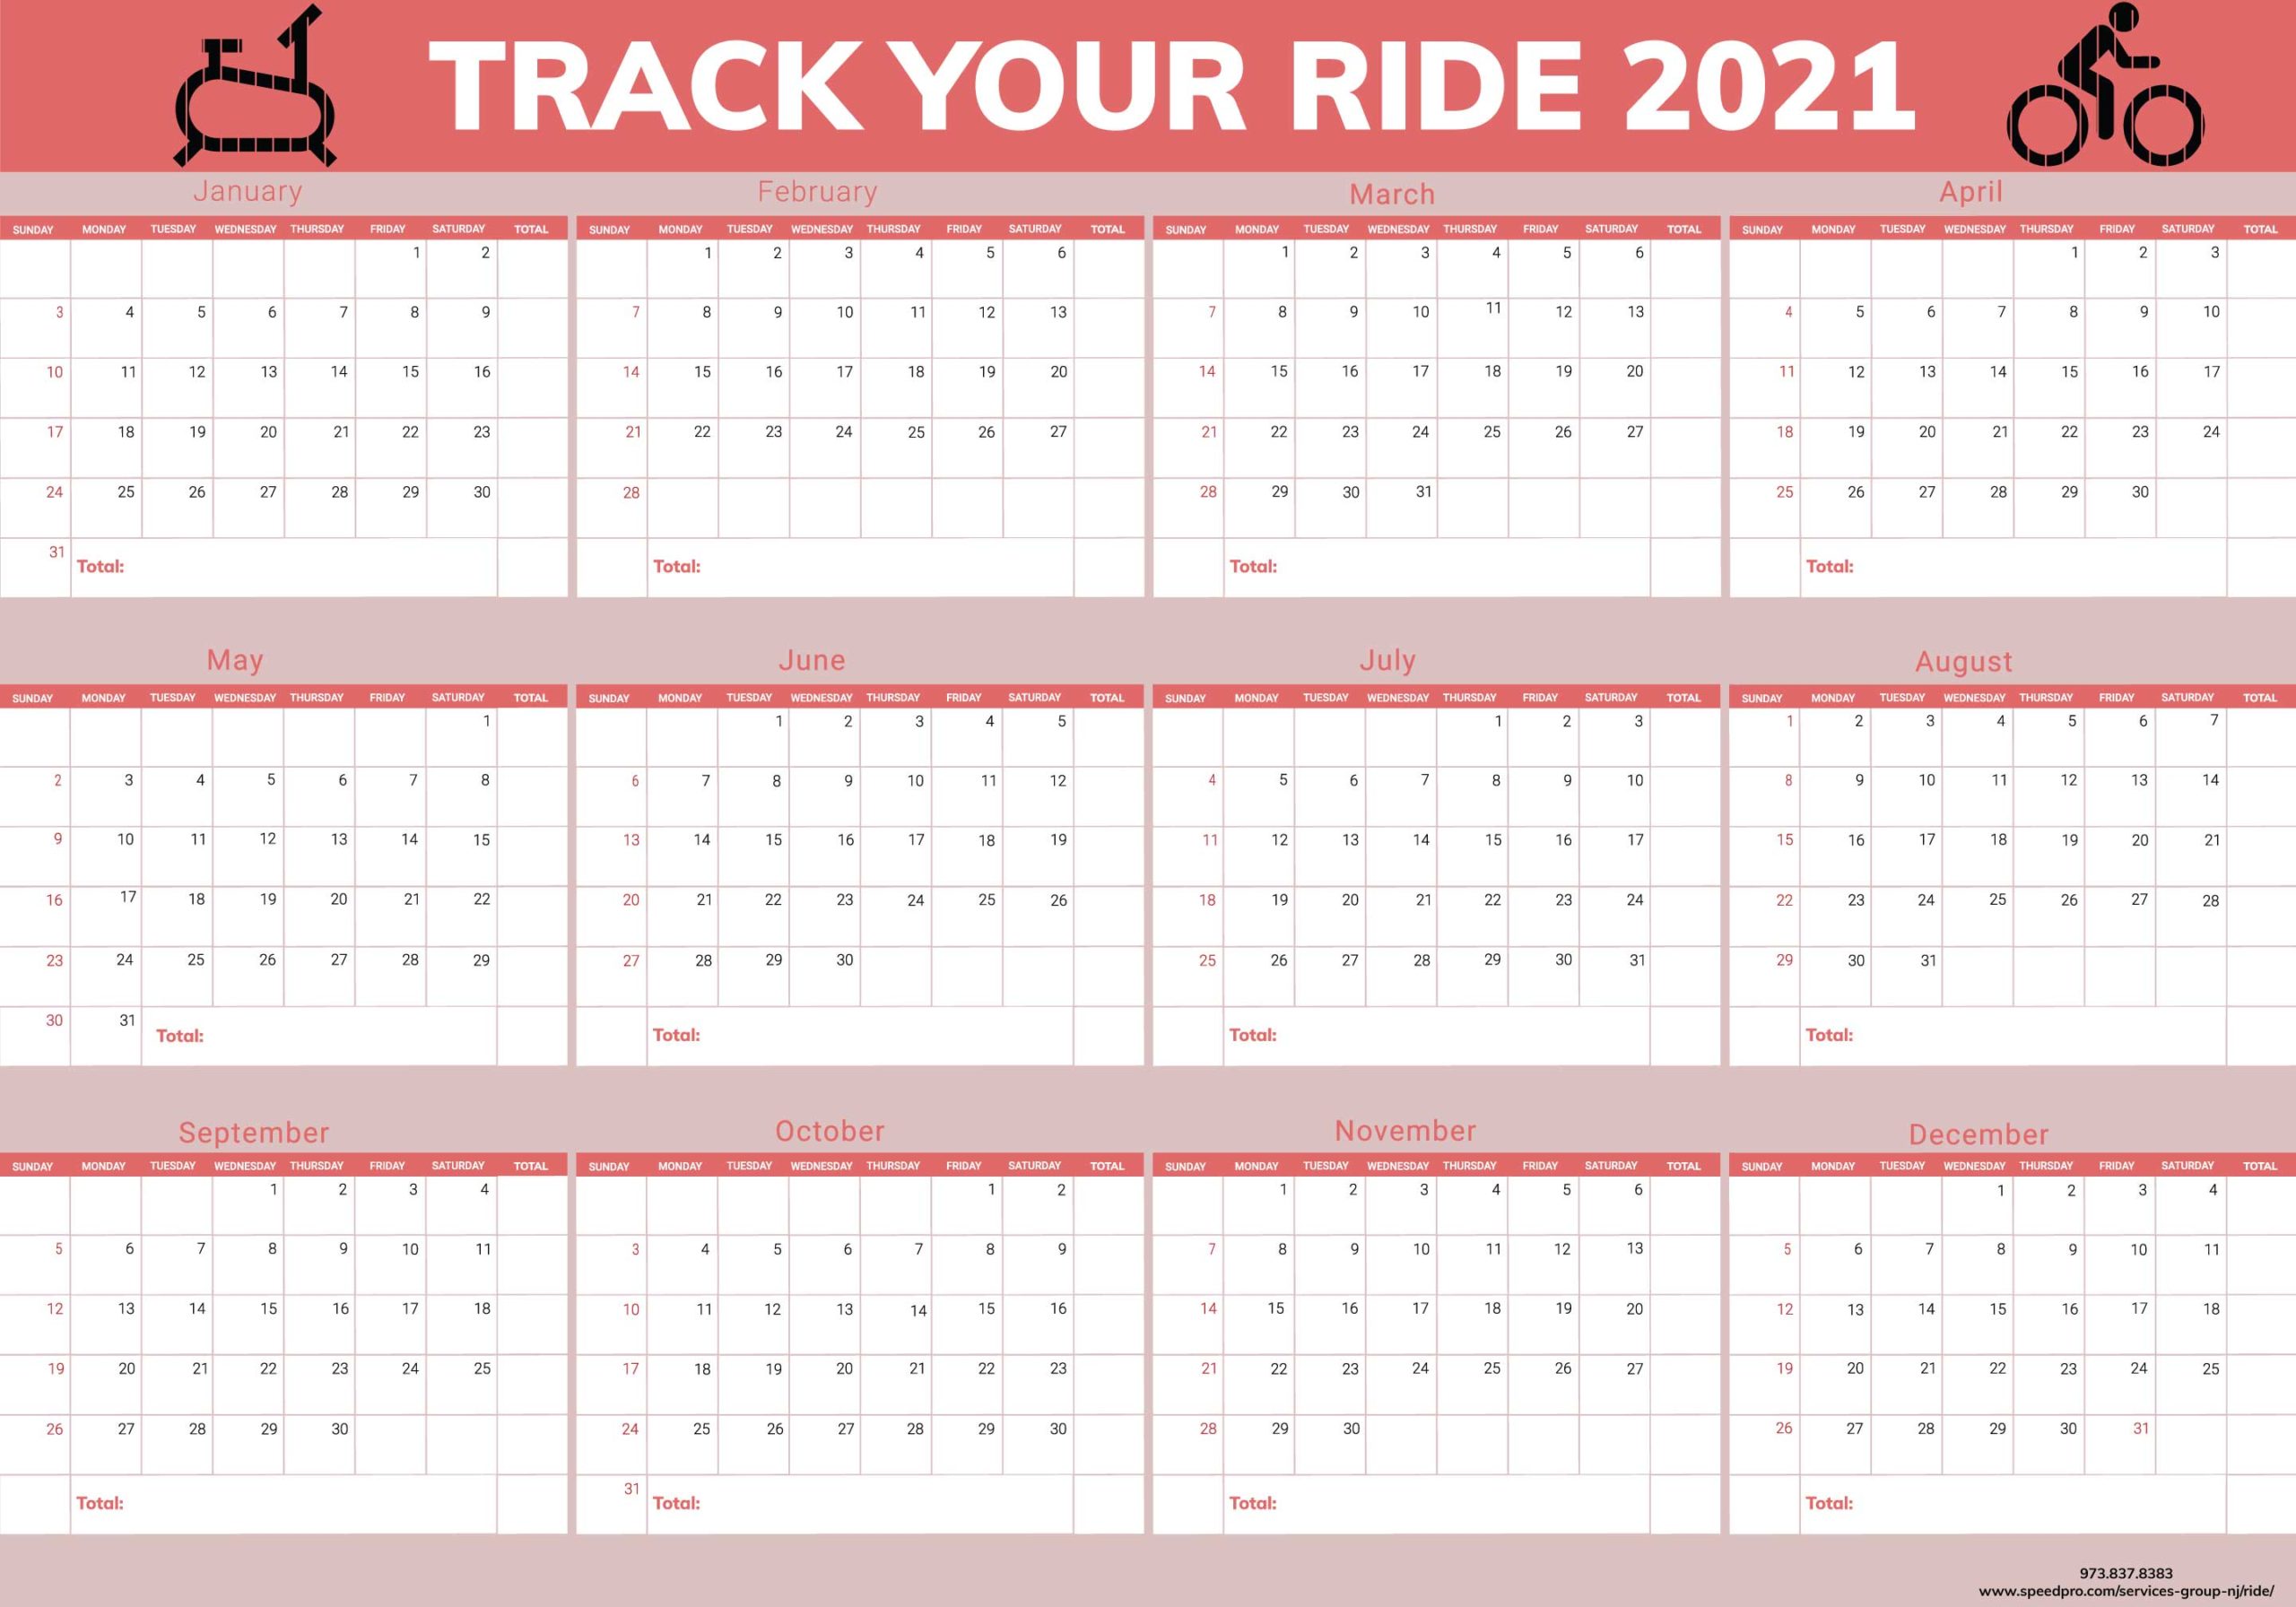 RIDE - Track Your Ride 2021 - Red